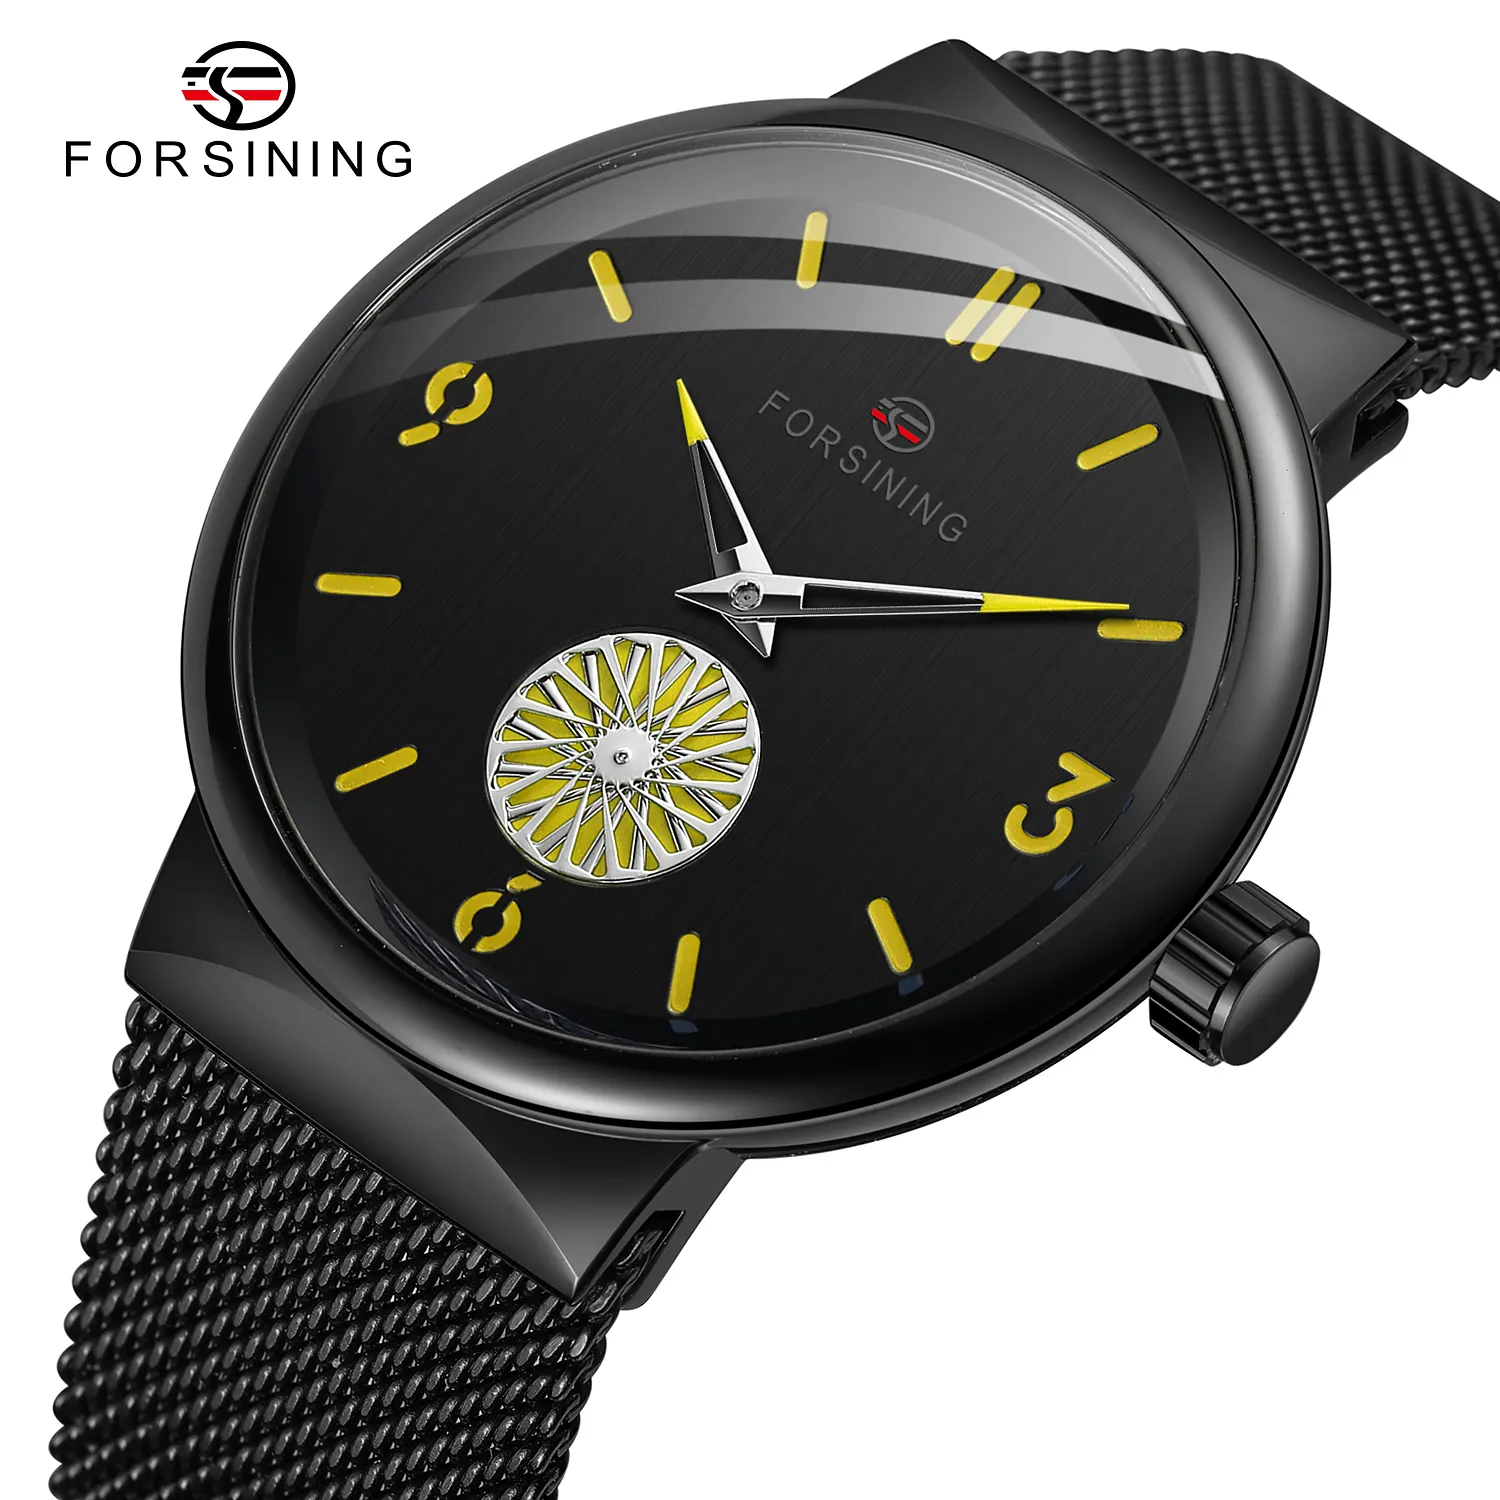 All Mechanical Watches 2022 Latest Luxury Forsining Watch Custom Water Resistant Skeleton Automatic Mechanical Wrist Watches